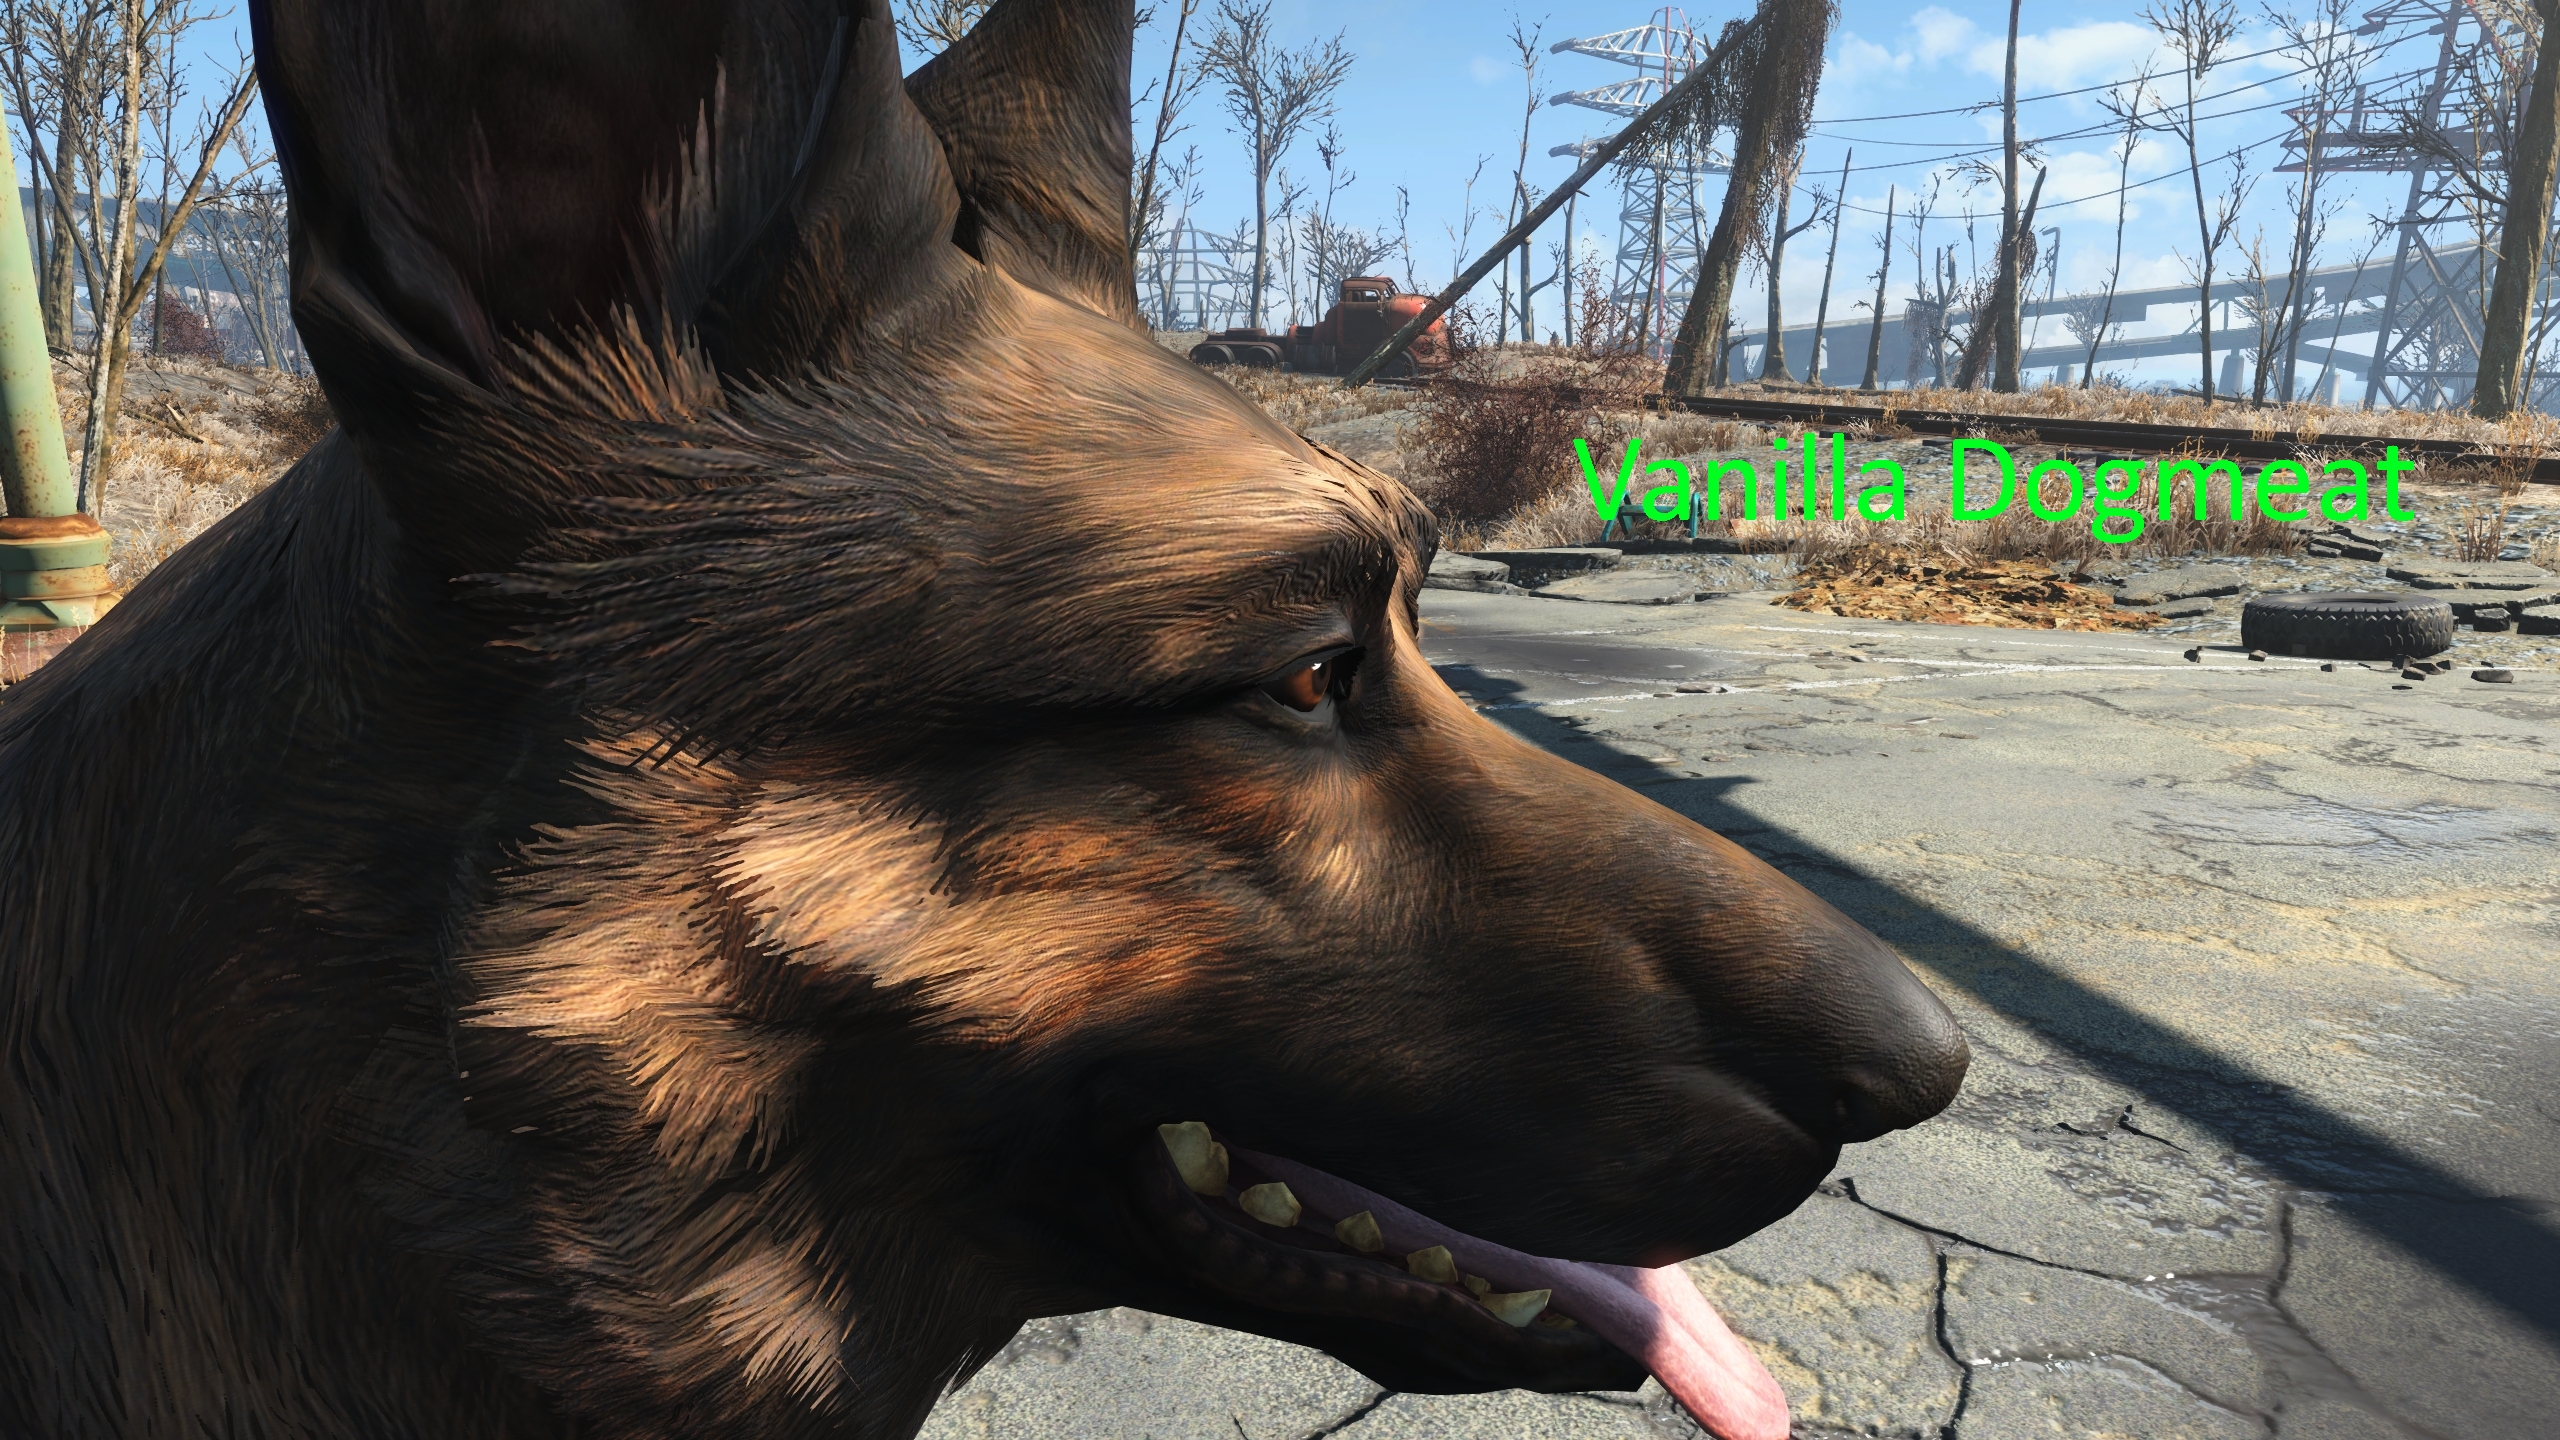 fallout 4 dogmeat clothing